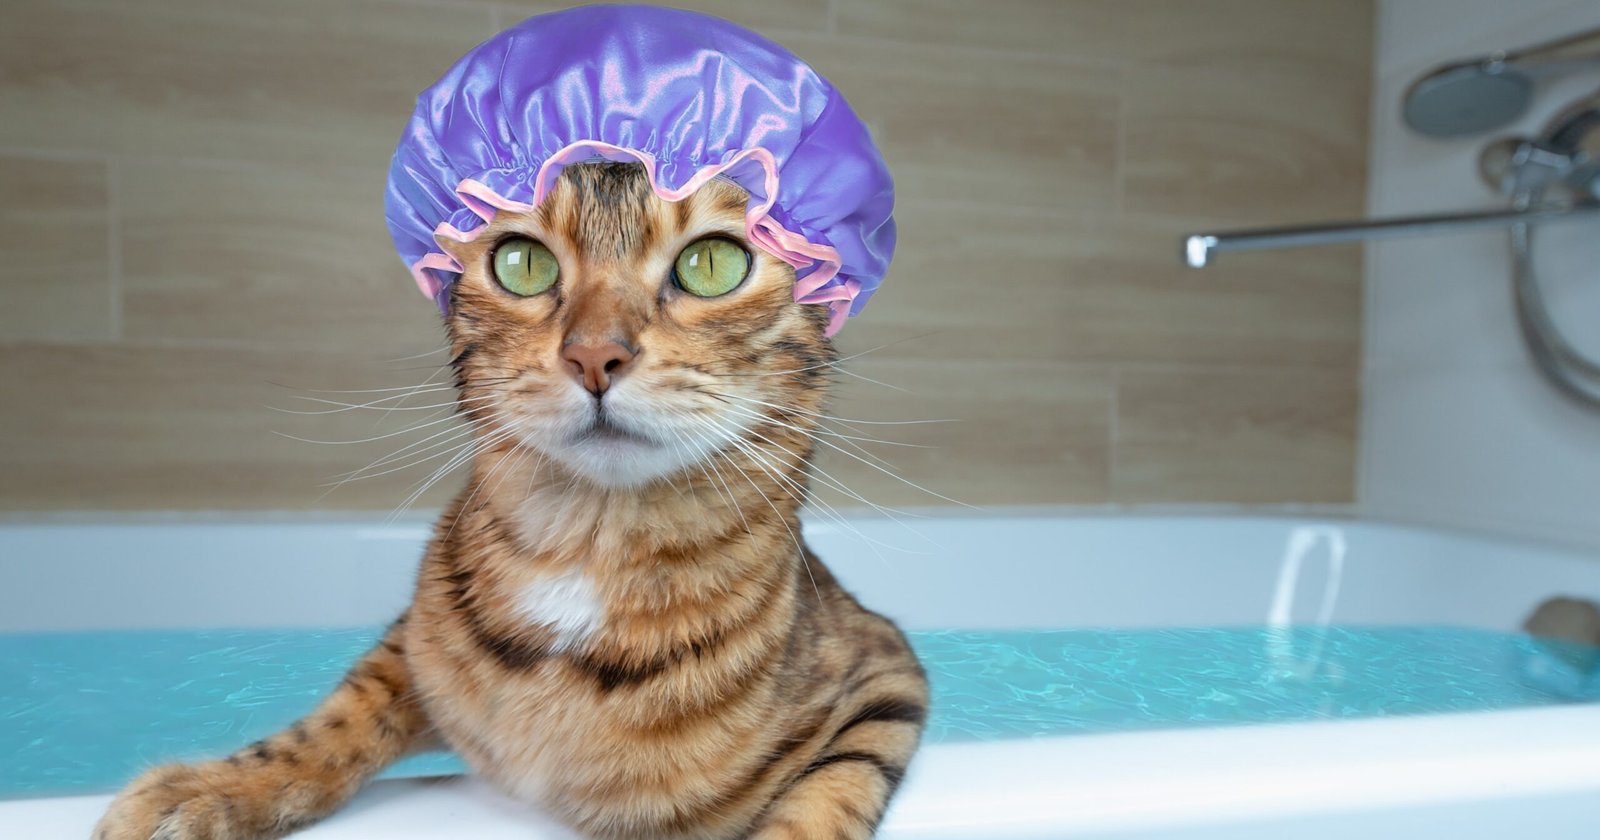 How To Care For A Cat With Cerebellar Hypoplasia